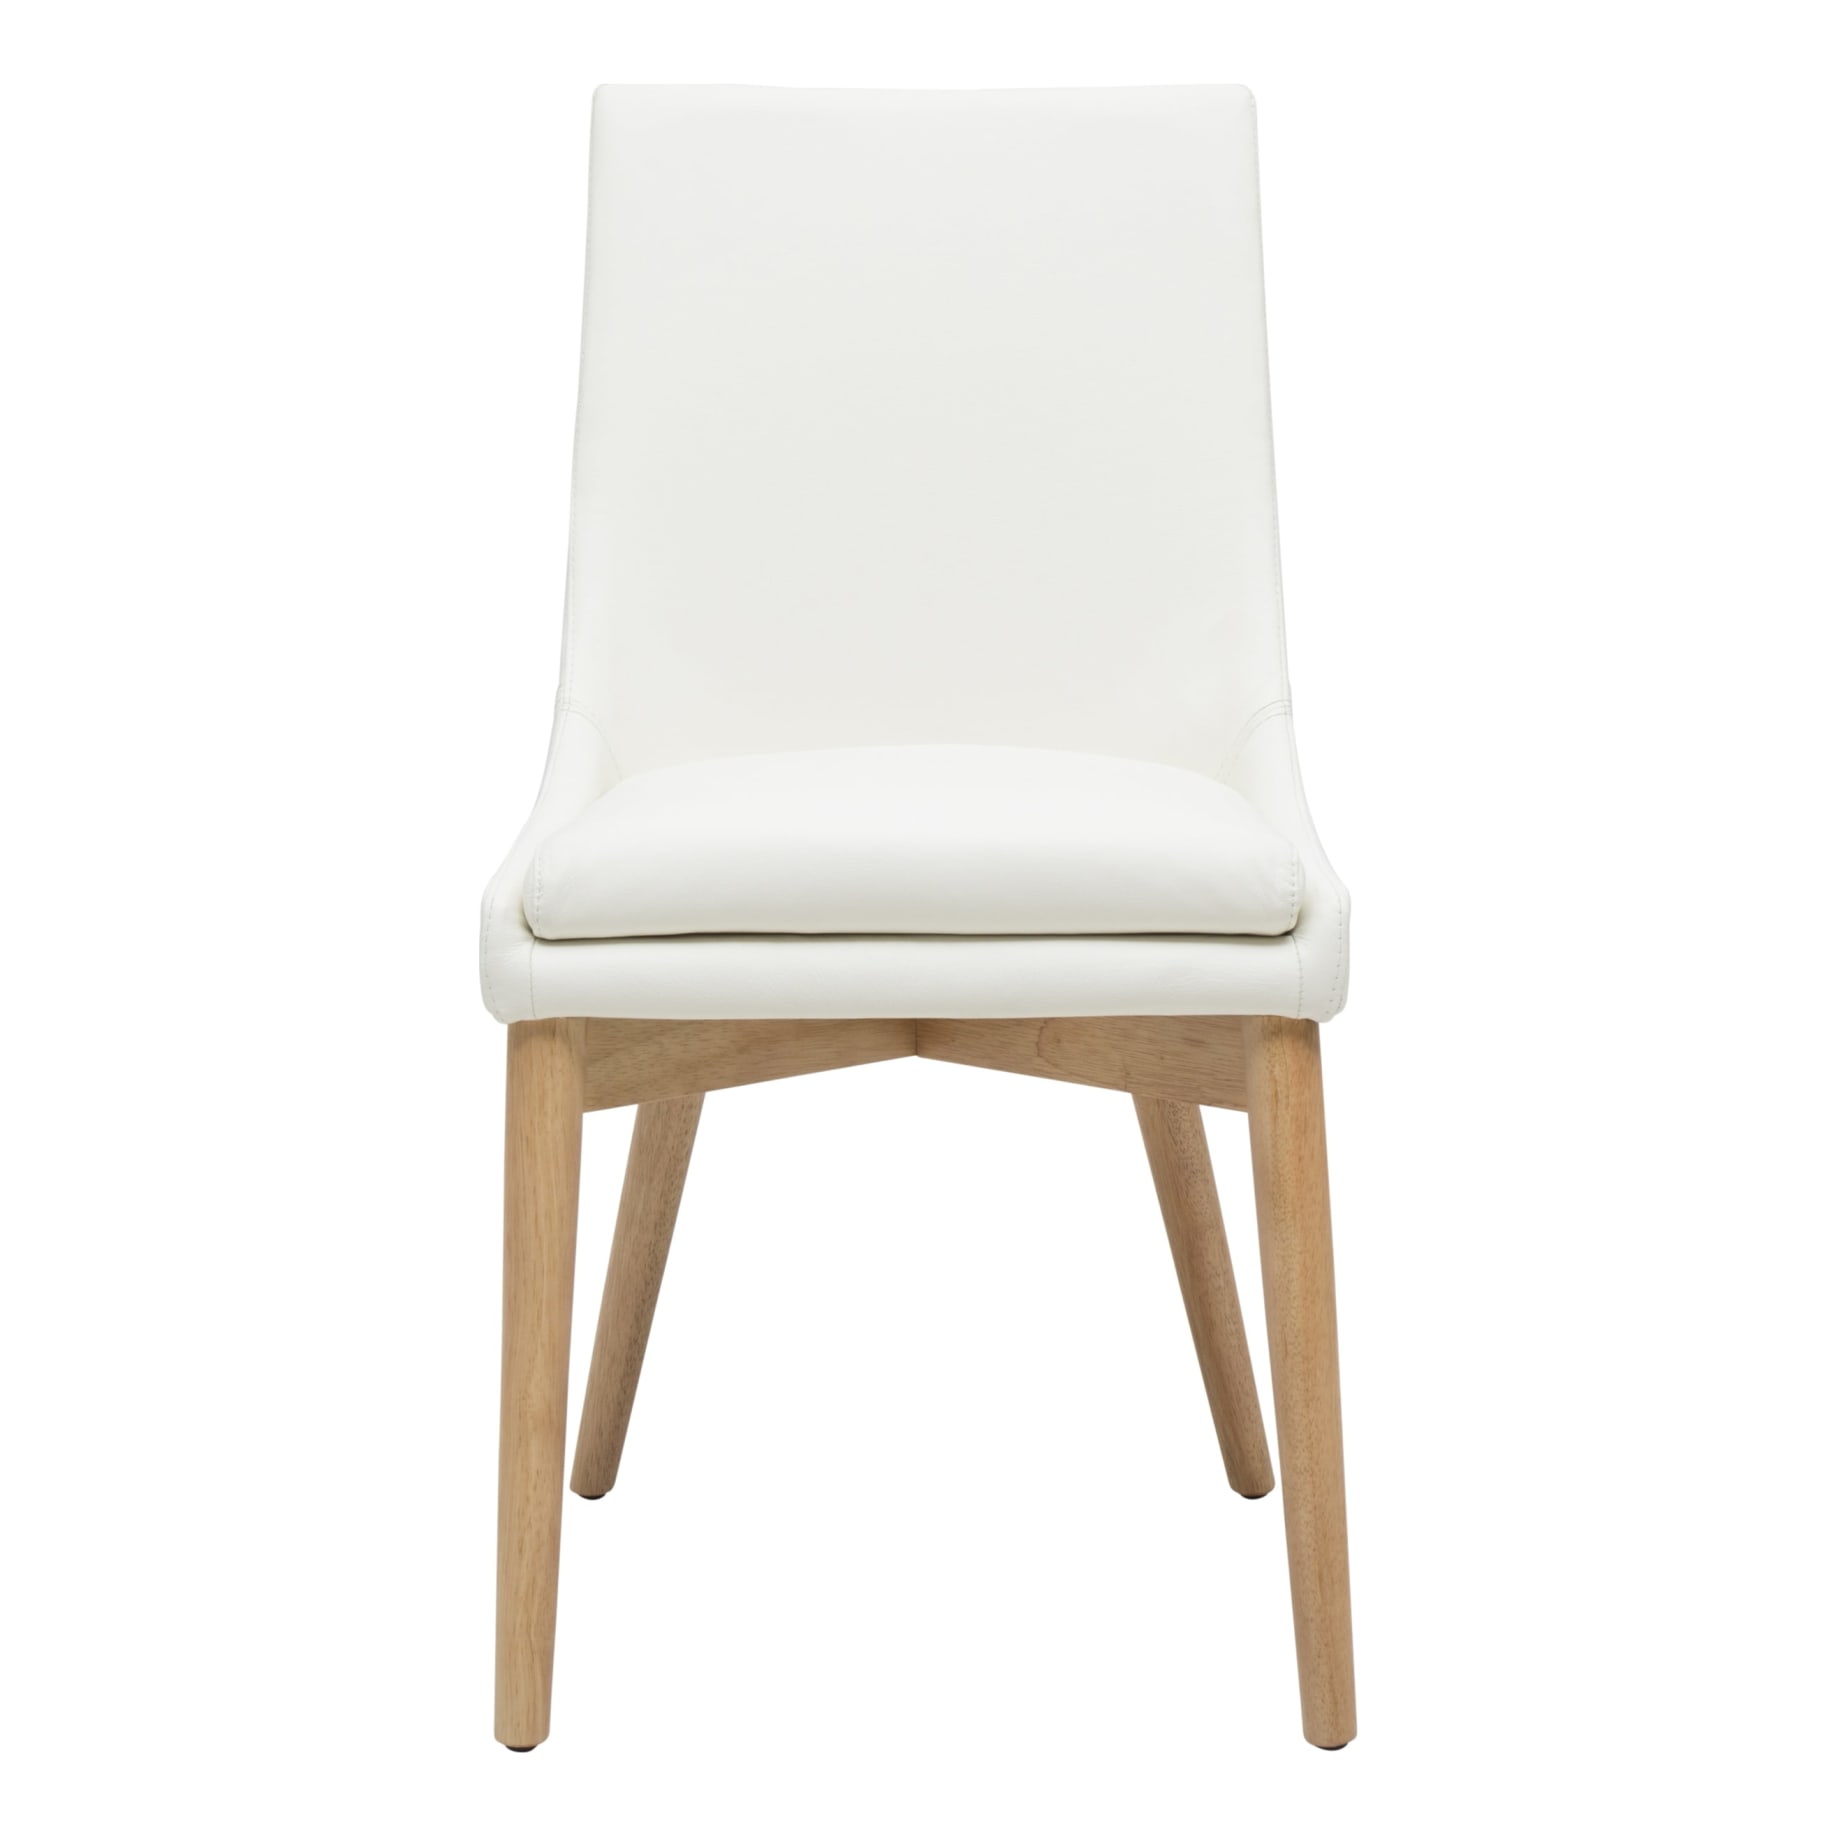 Highland Dining Chair in White Leather / Oak Stain